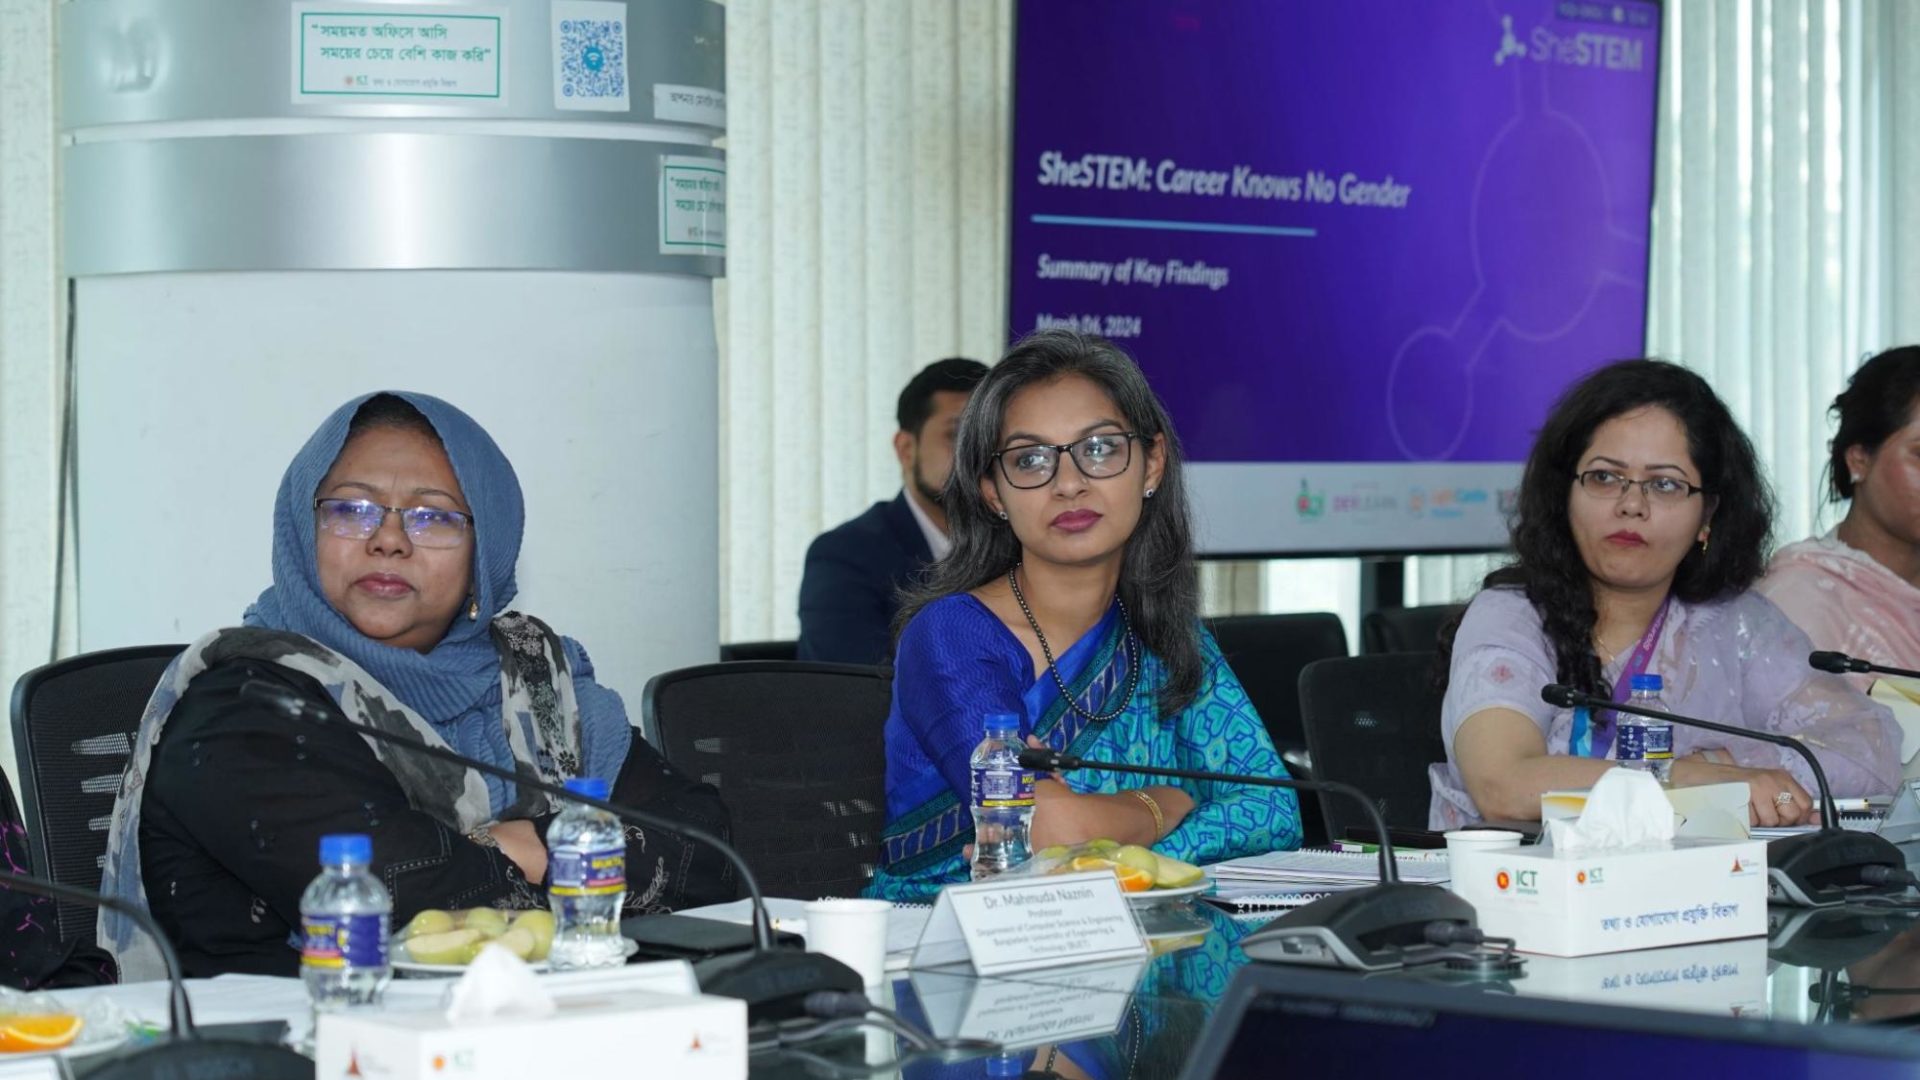 From left to right: Dr. Mahmuda Naznin, Professor, Department of Computer Science & Engineering, BUET, Sadia Haque, Chief Executive Officer, ShareTrip